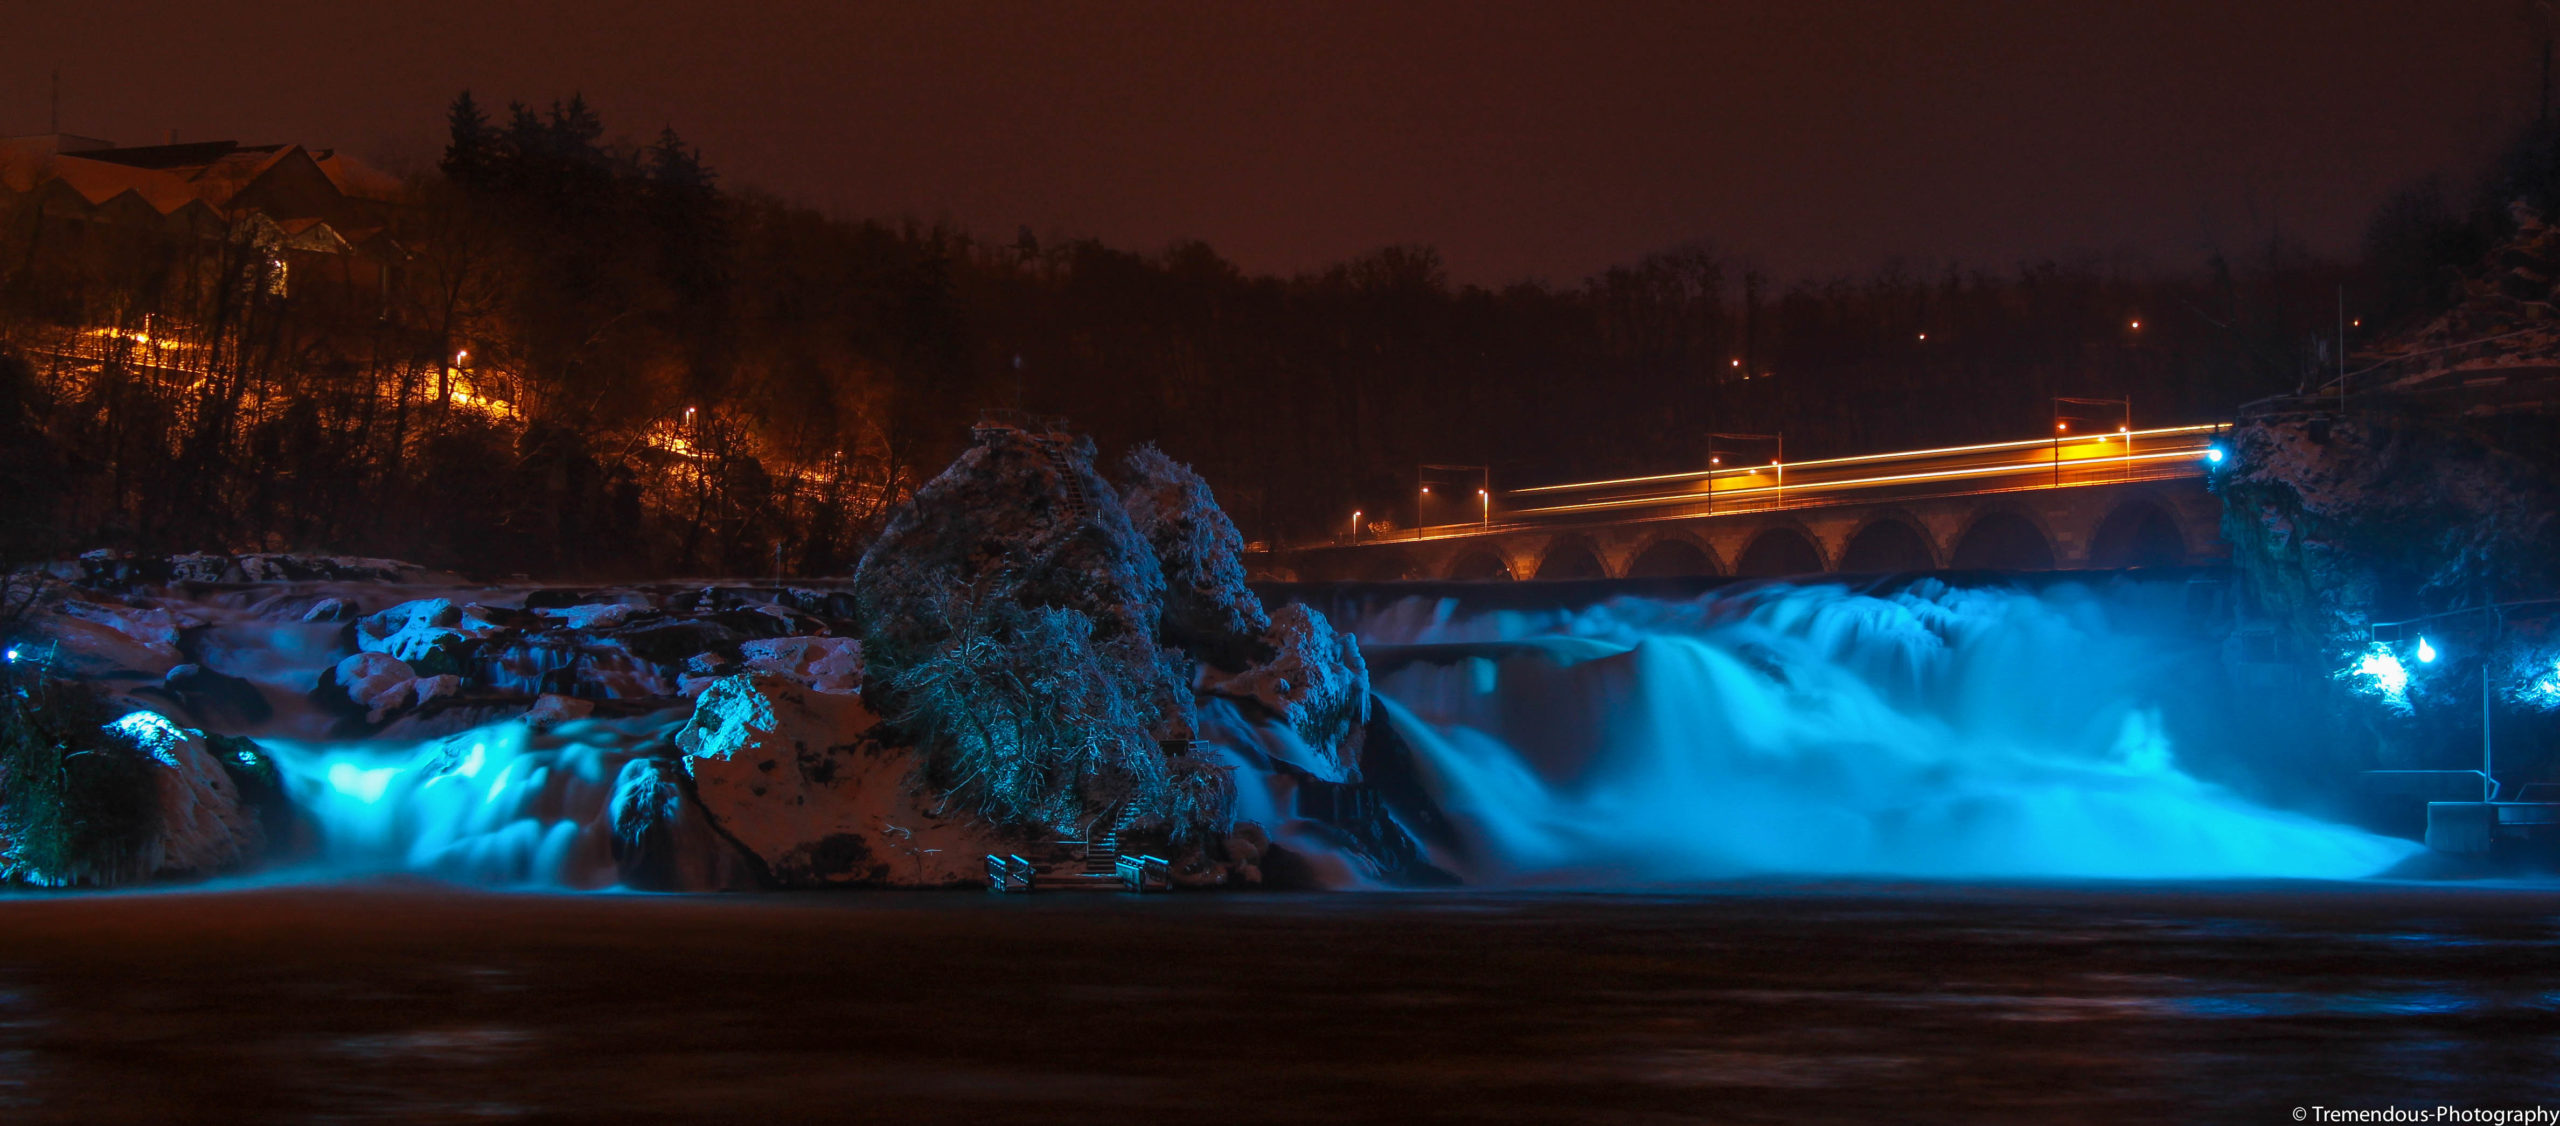 Rheinfall by Night © Tremendous-Photography - licence [CC BY-SA 3.0] from Wikimedia Commons